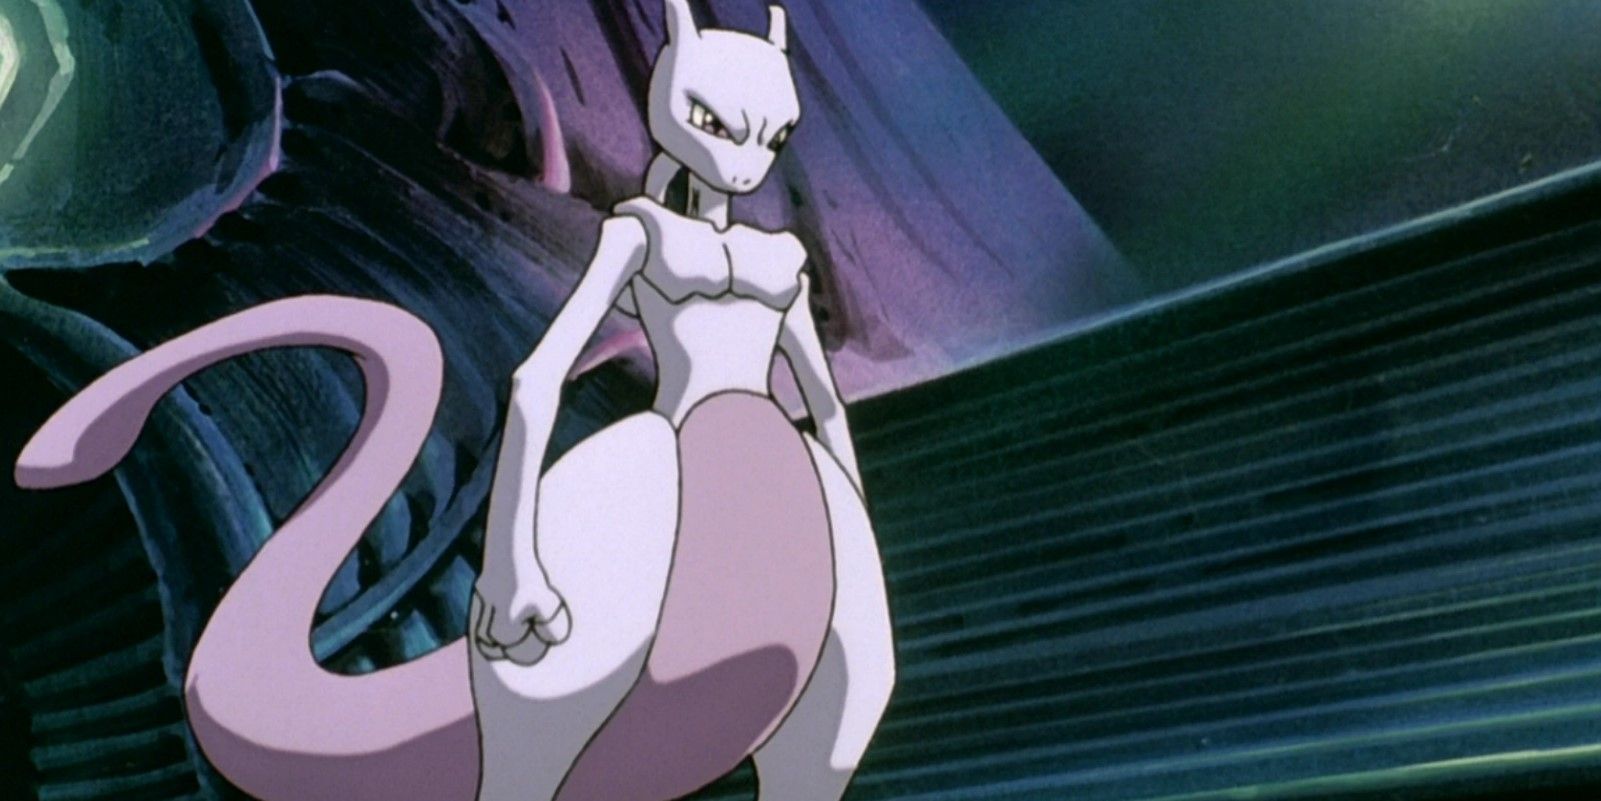 Pokemon Mewtwo from the movie